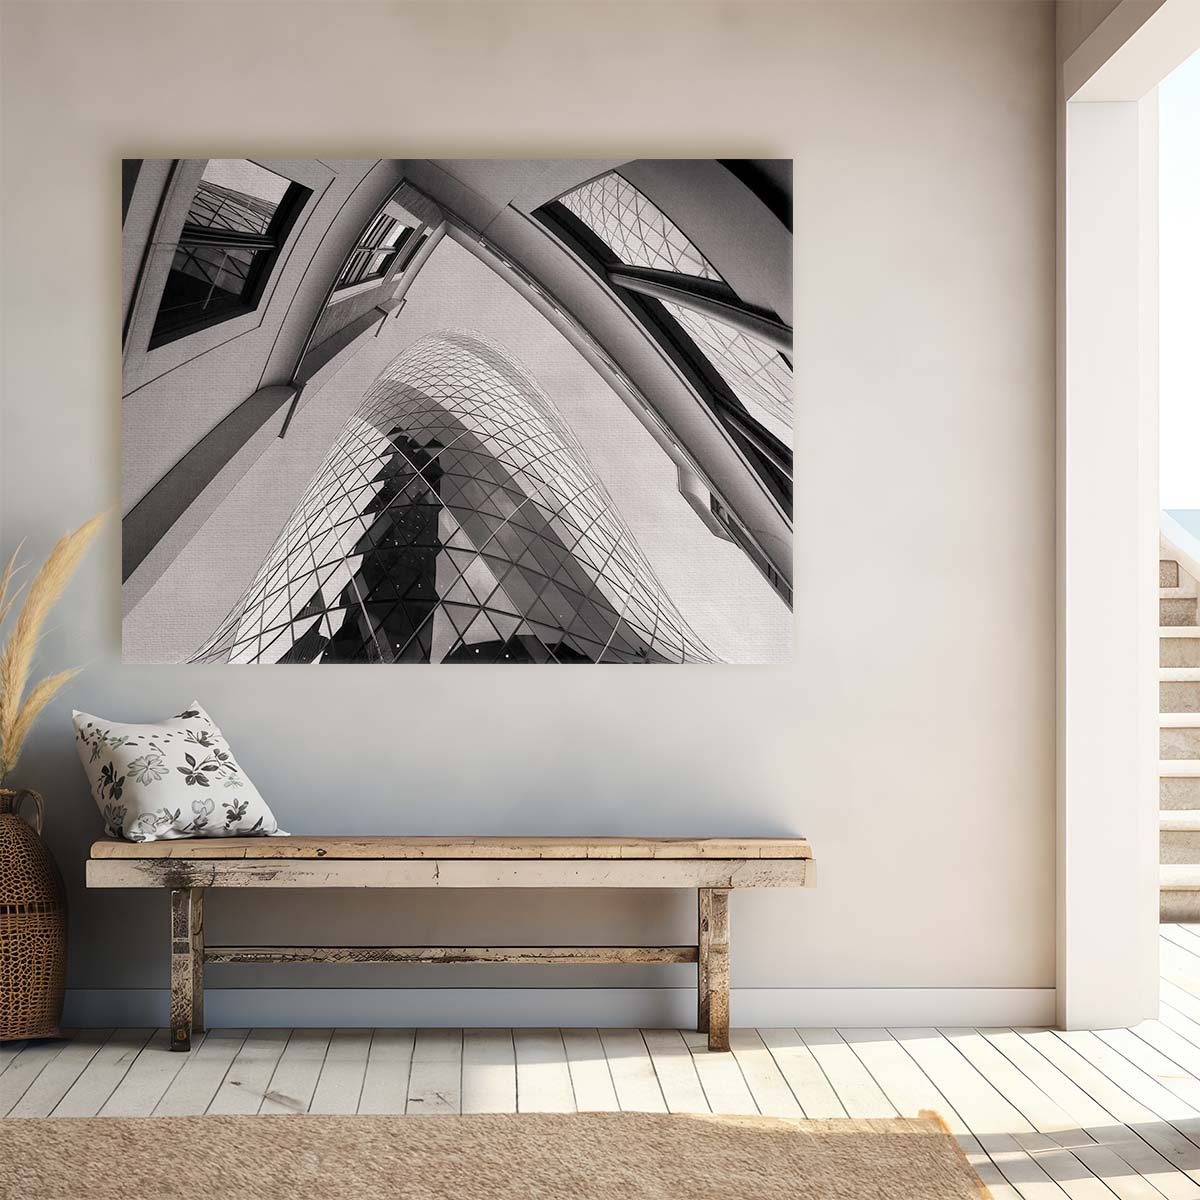 Iconic Gherkin London Skyscraper Monochrome Wall Art by Luxuriance Designs. Made in USA.